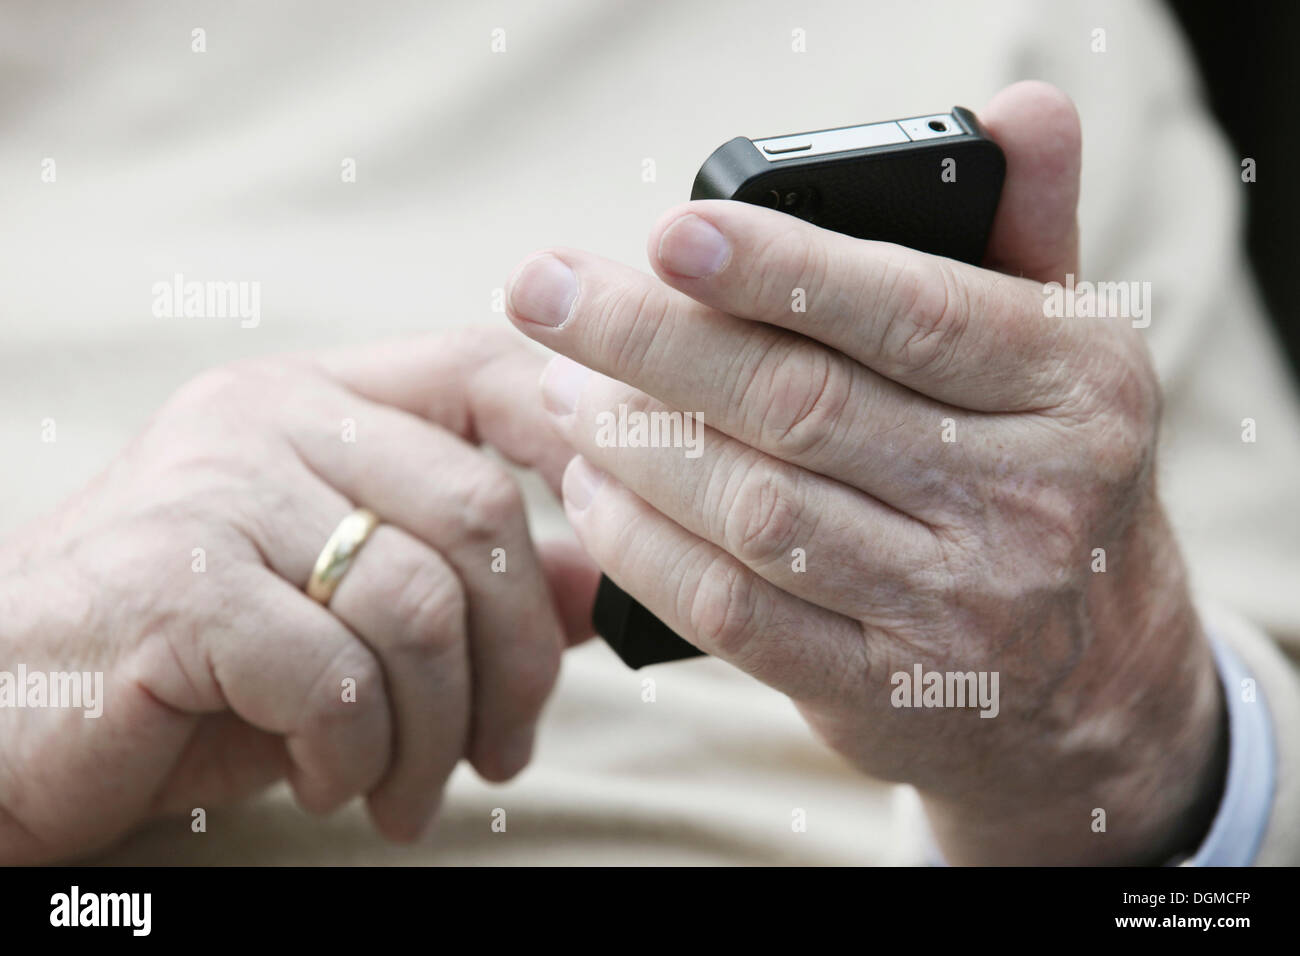 Senior holding a smartphone in his hands Stock Photo